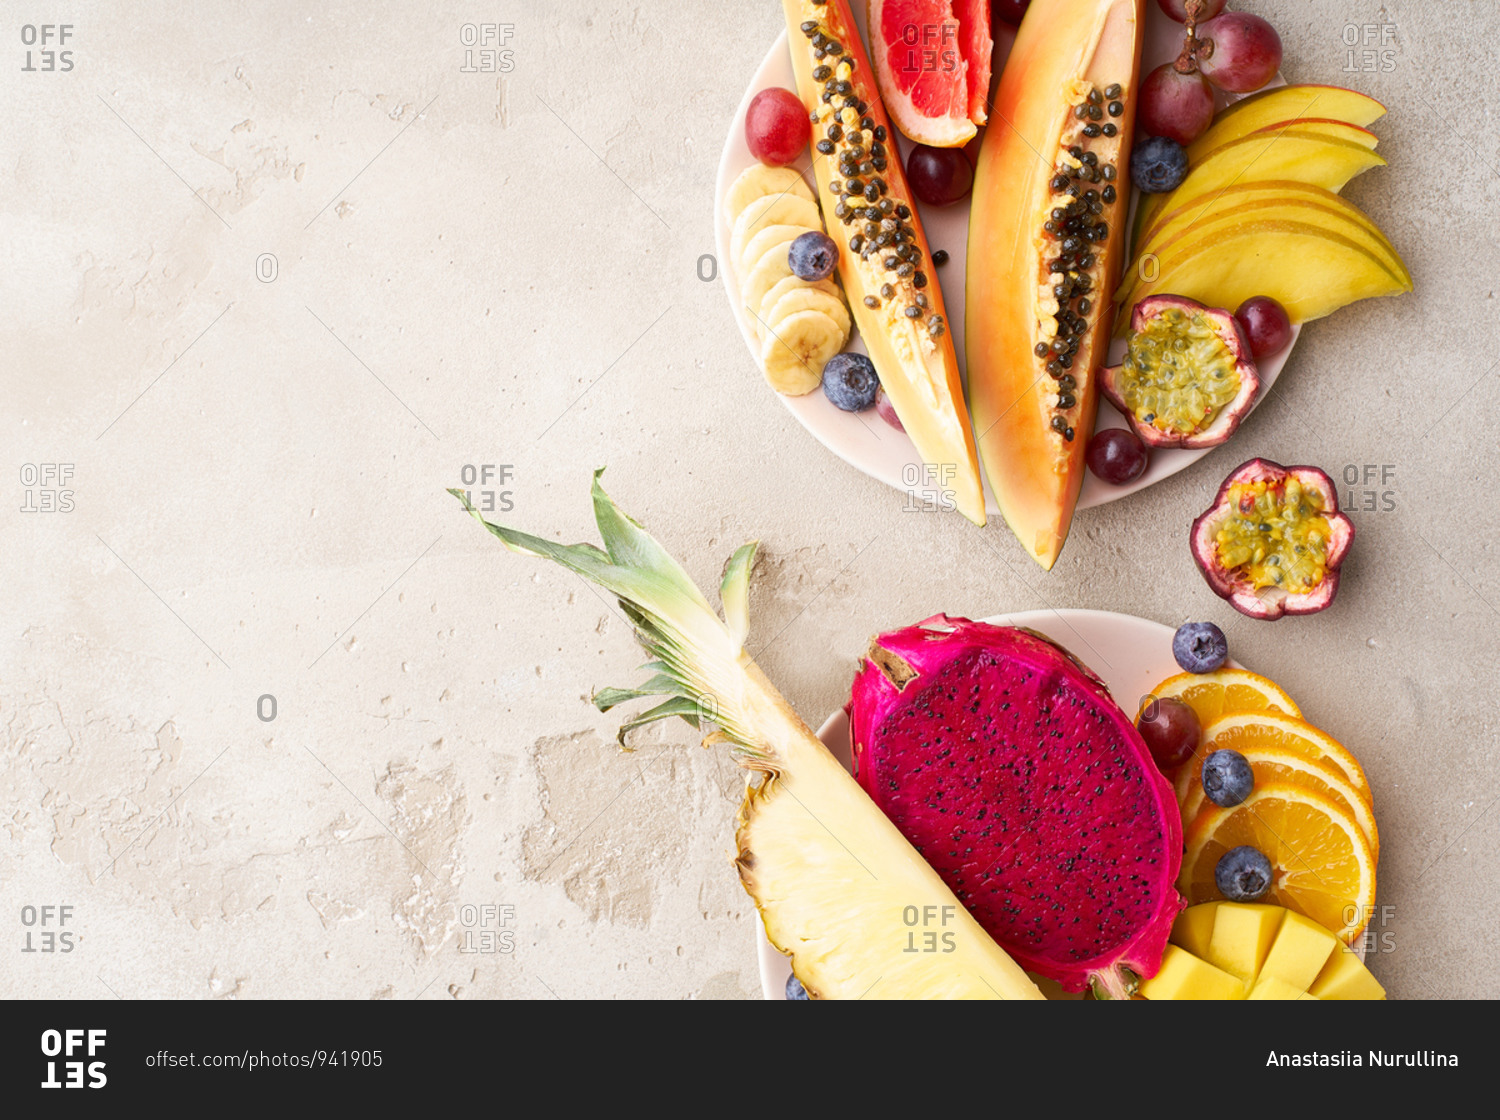 Colorful tropical summer fruits and berries. Papaya, mango, passion fruit, banana, grapes sliced and served on a plate. Summer fruits platter